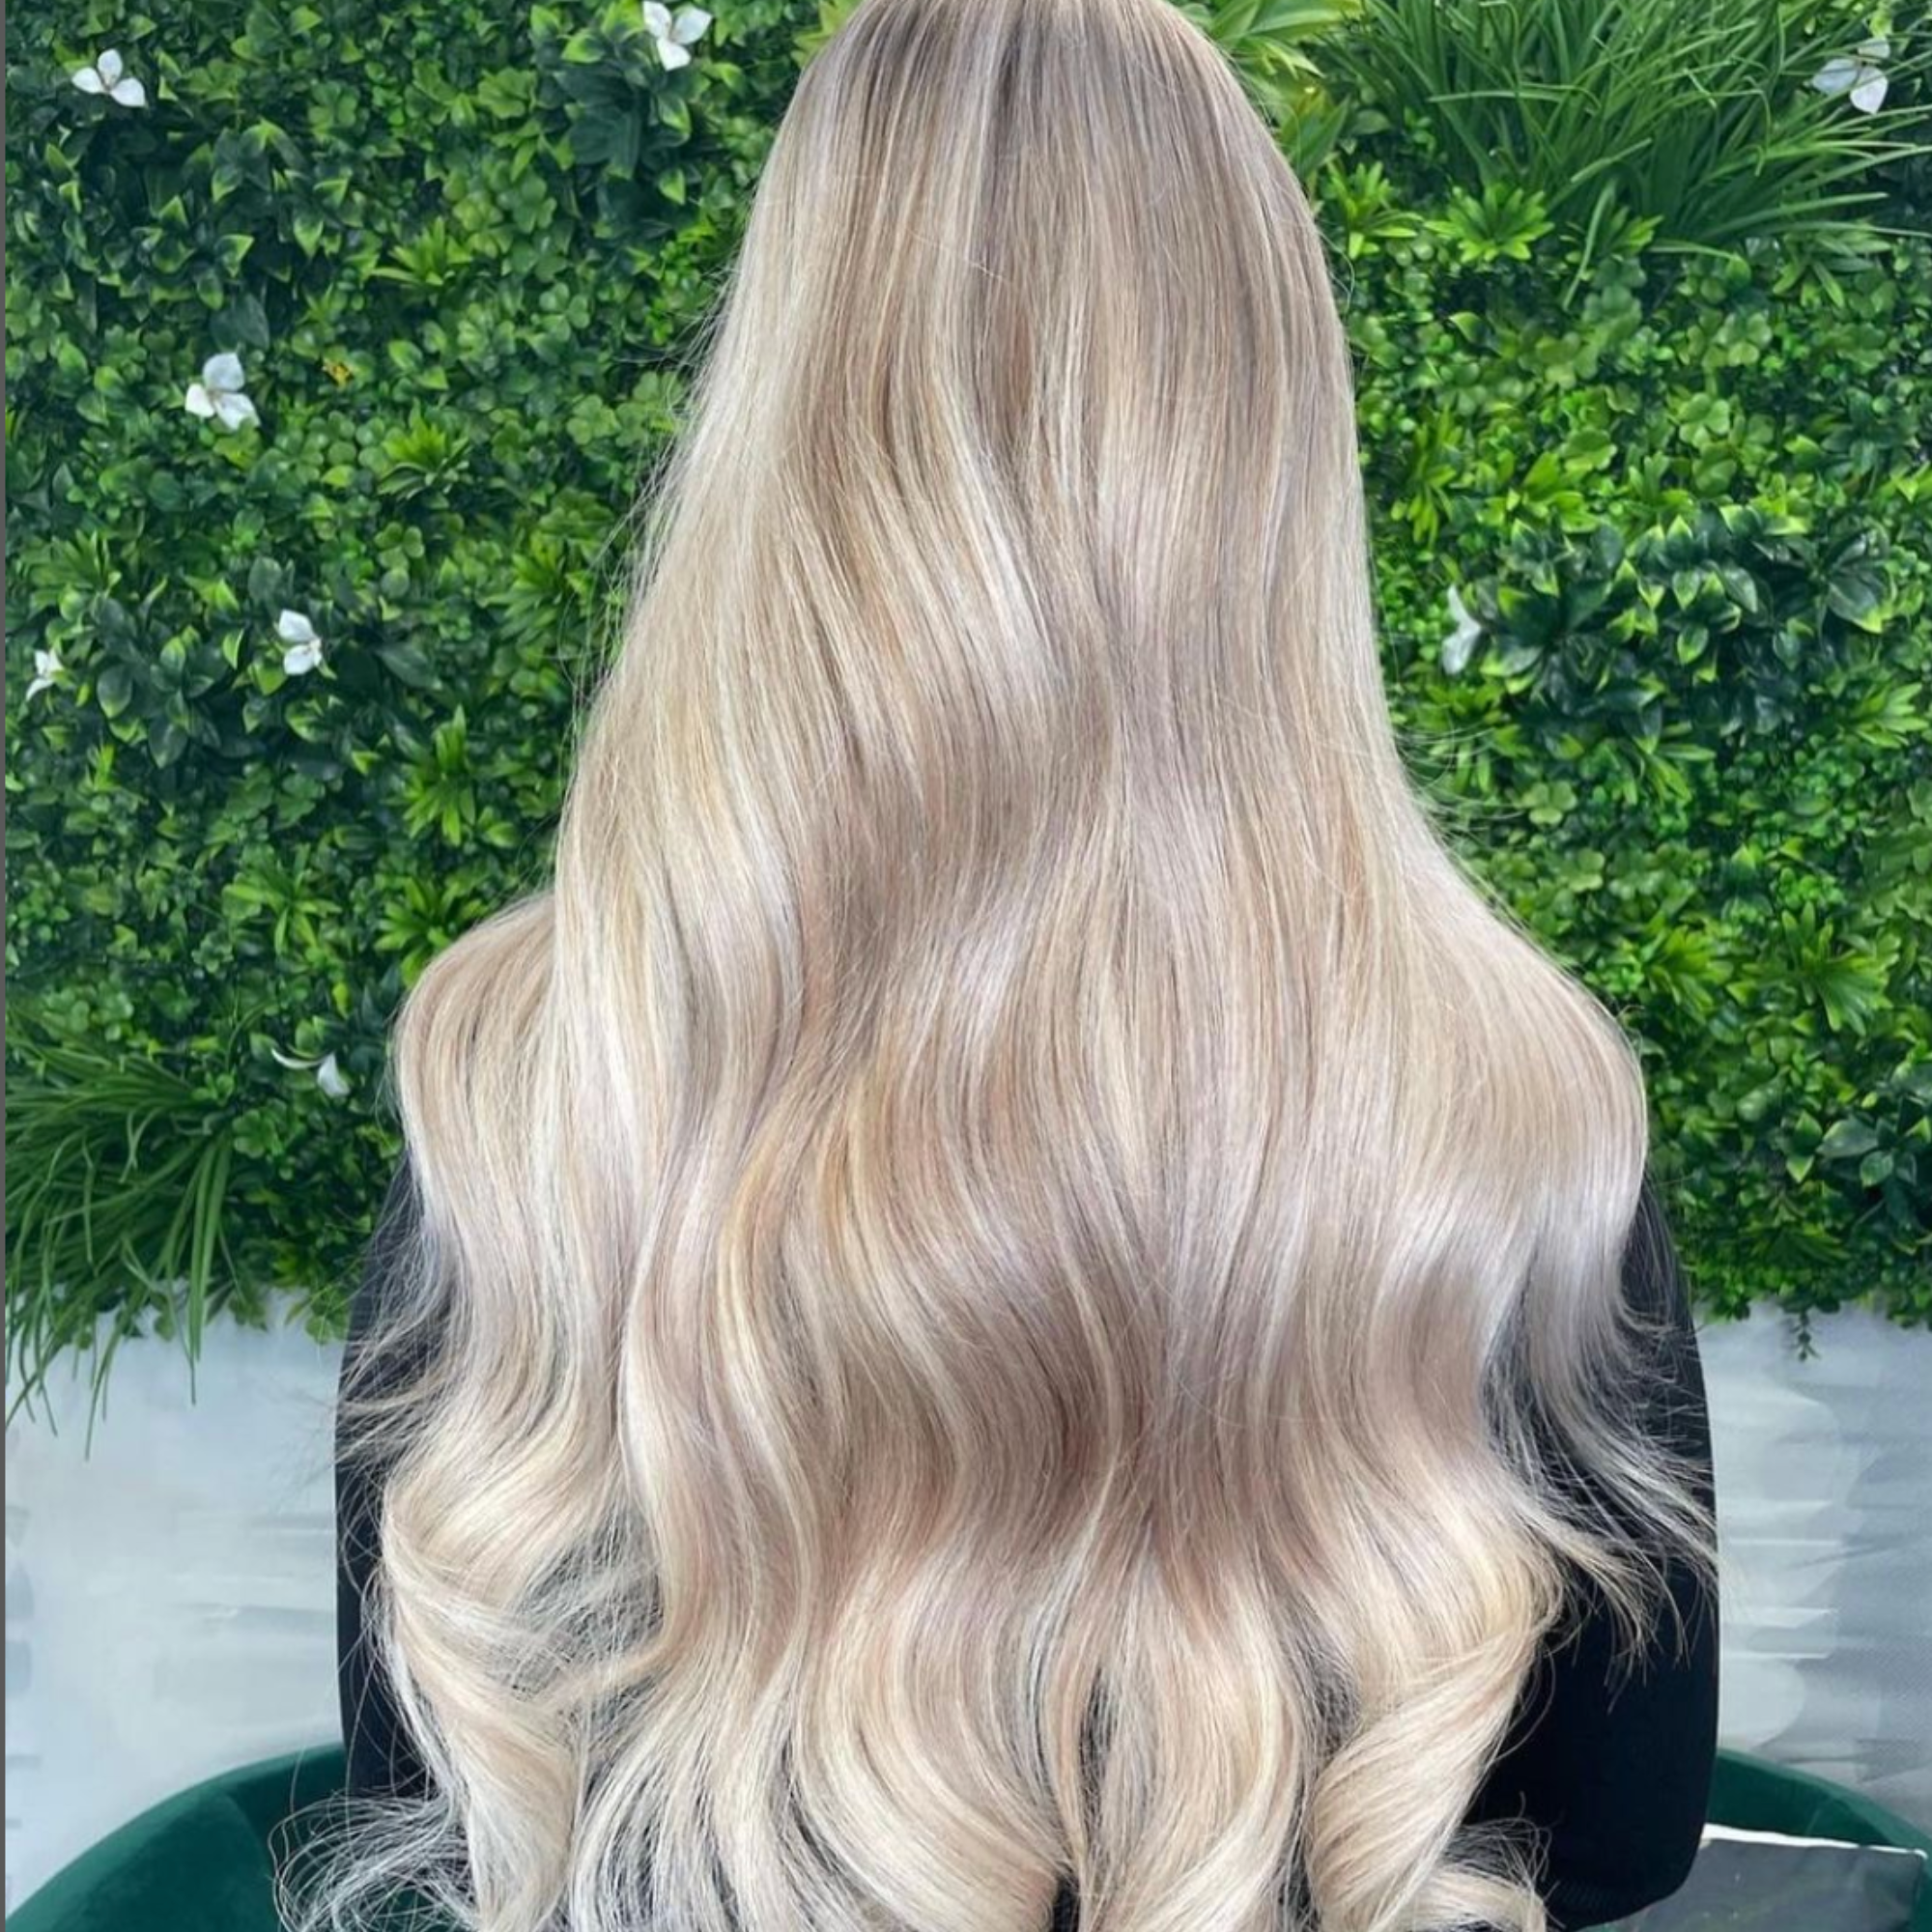 18" Invisible Tape Extensions Steel Blonde